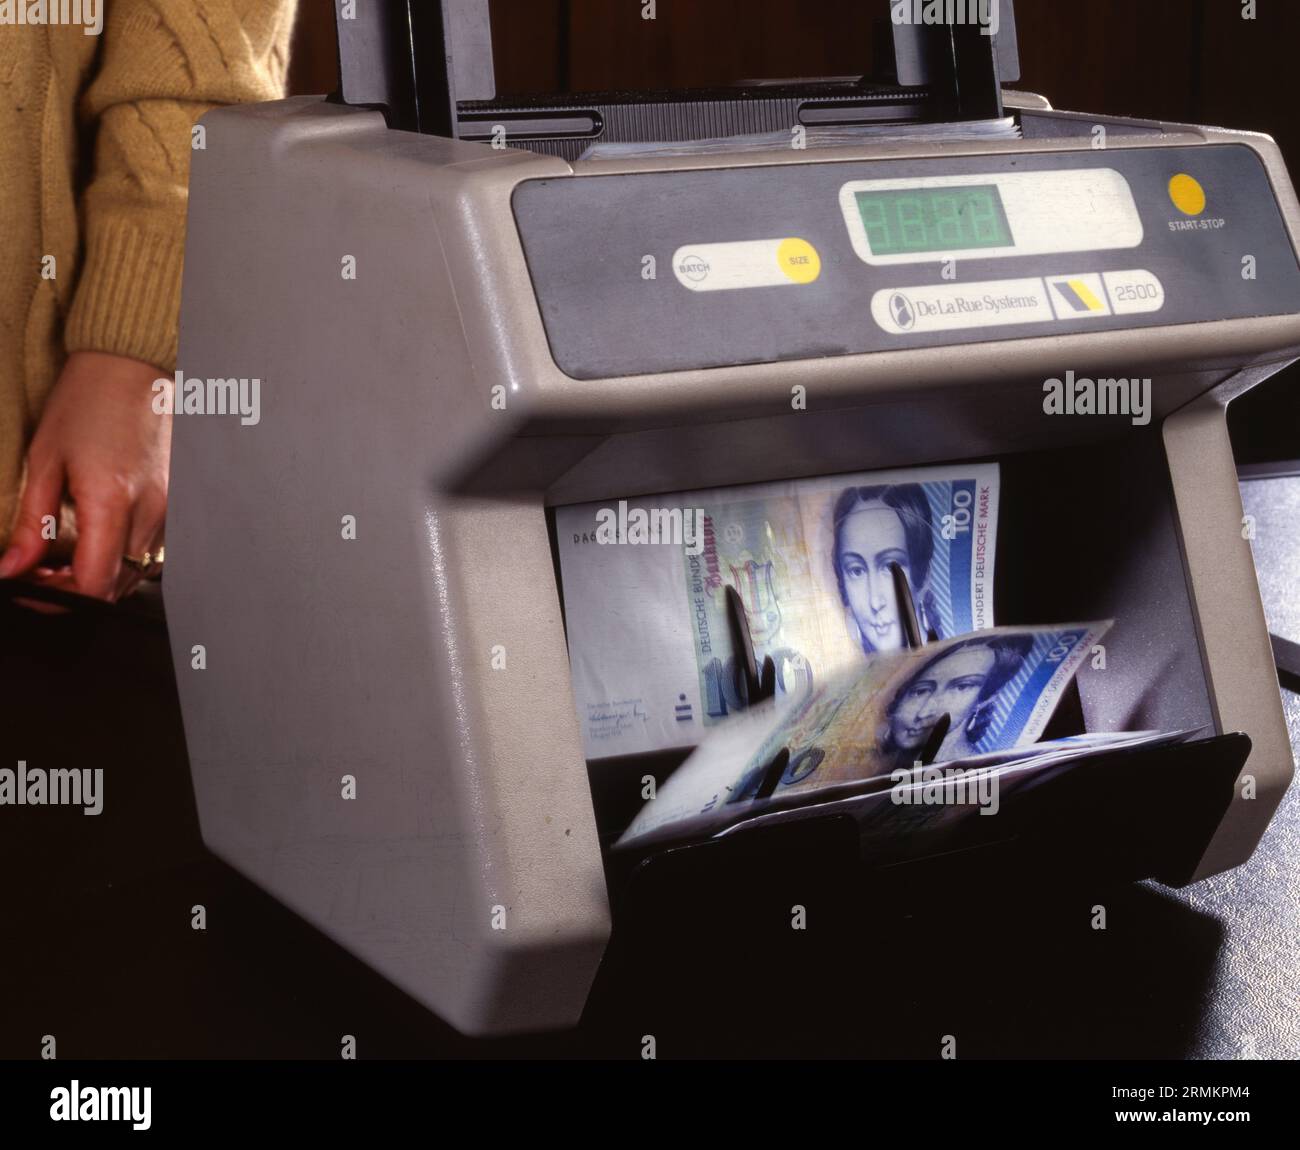 DEU, Germany: The historical slides from the times 80-90s, Iserlohn. Bank. Money counter. Larger notes DM 80s Stock Photo